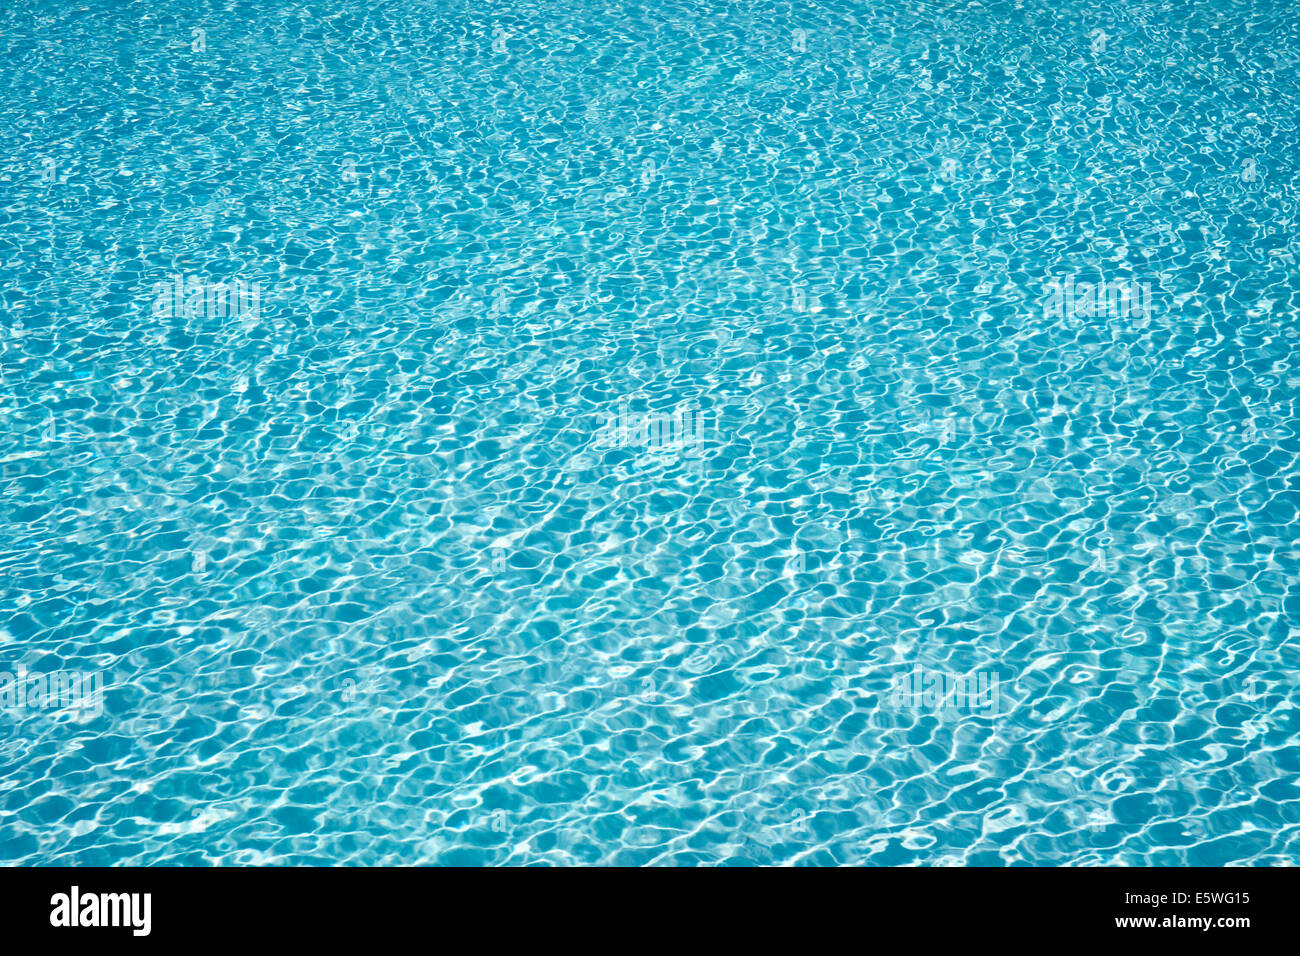 Slightly choppy water surface of a swimming pool Stock Photo